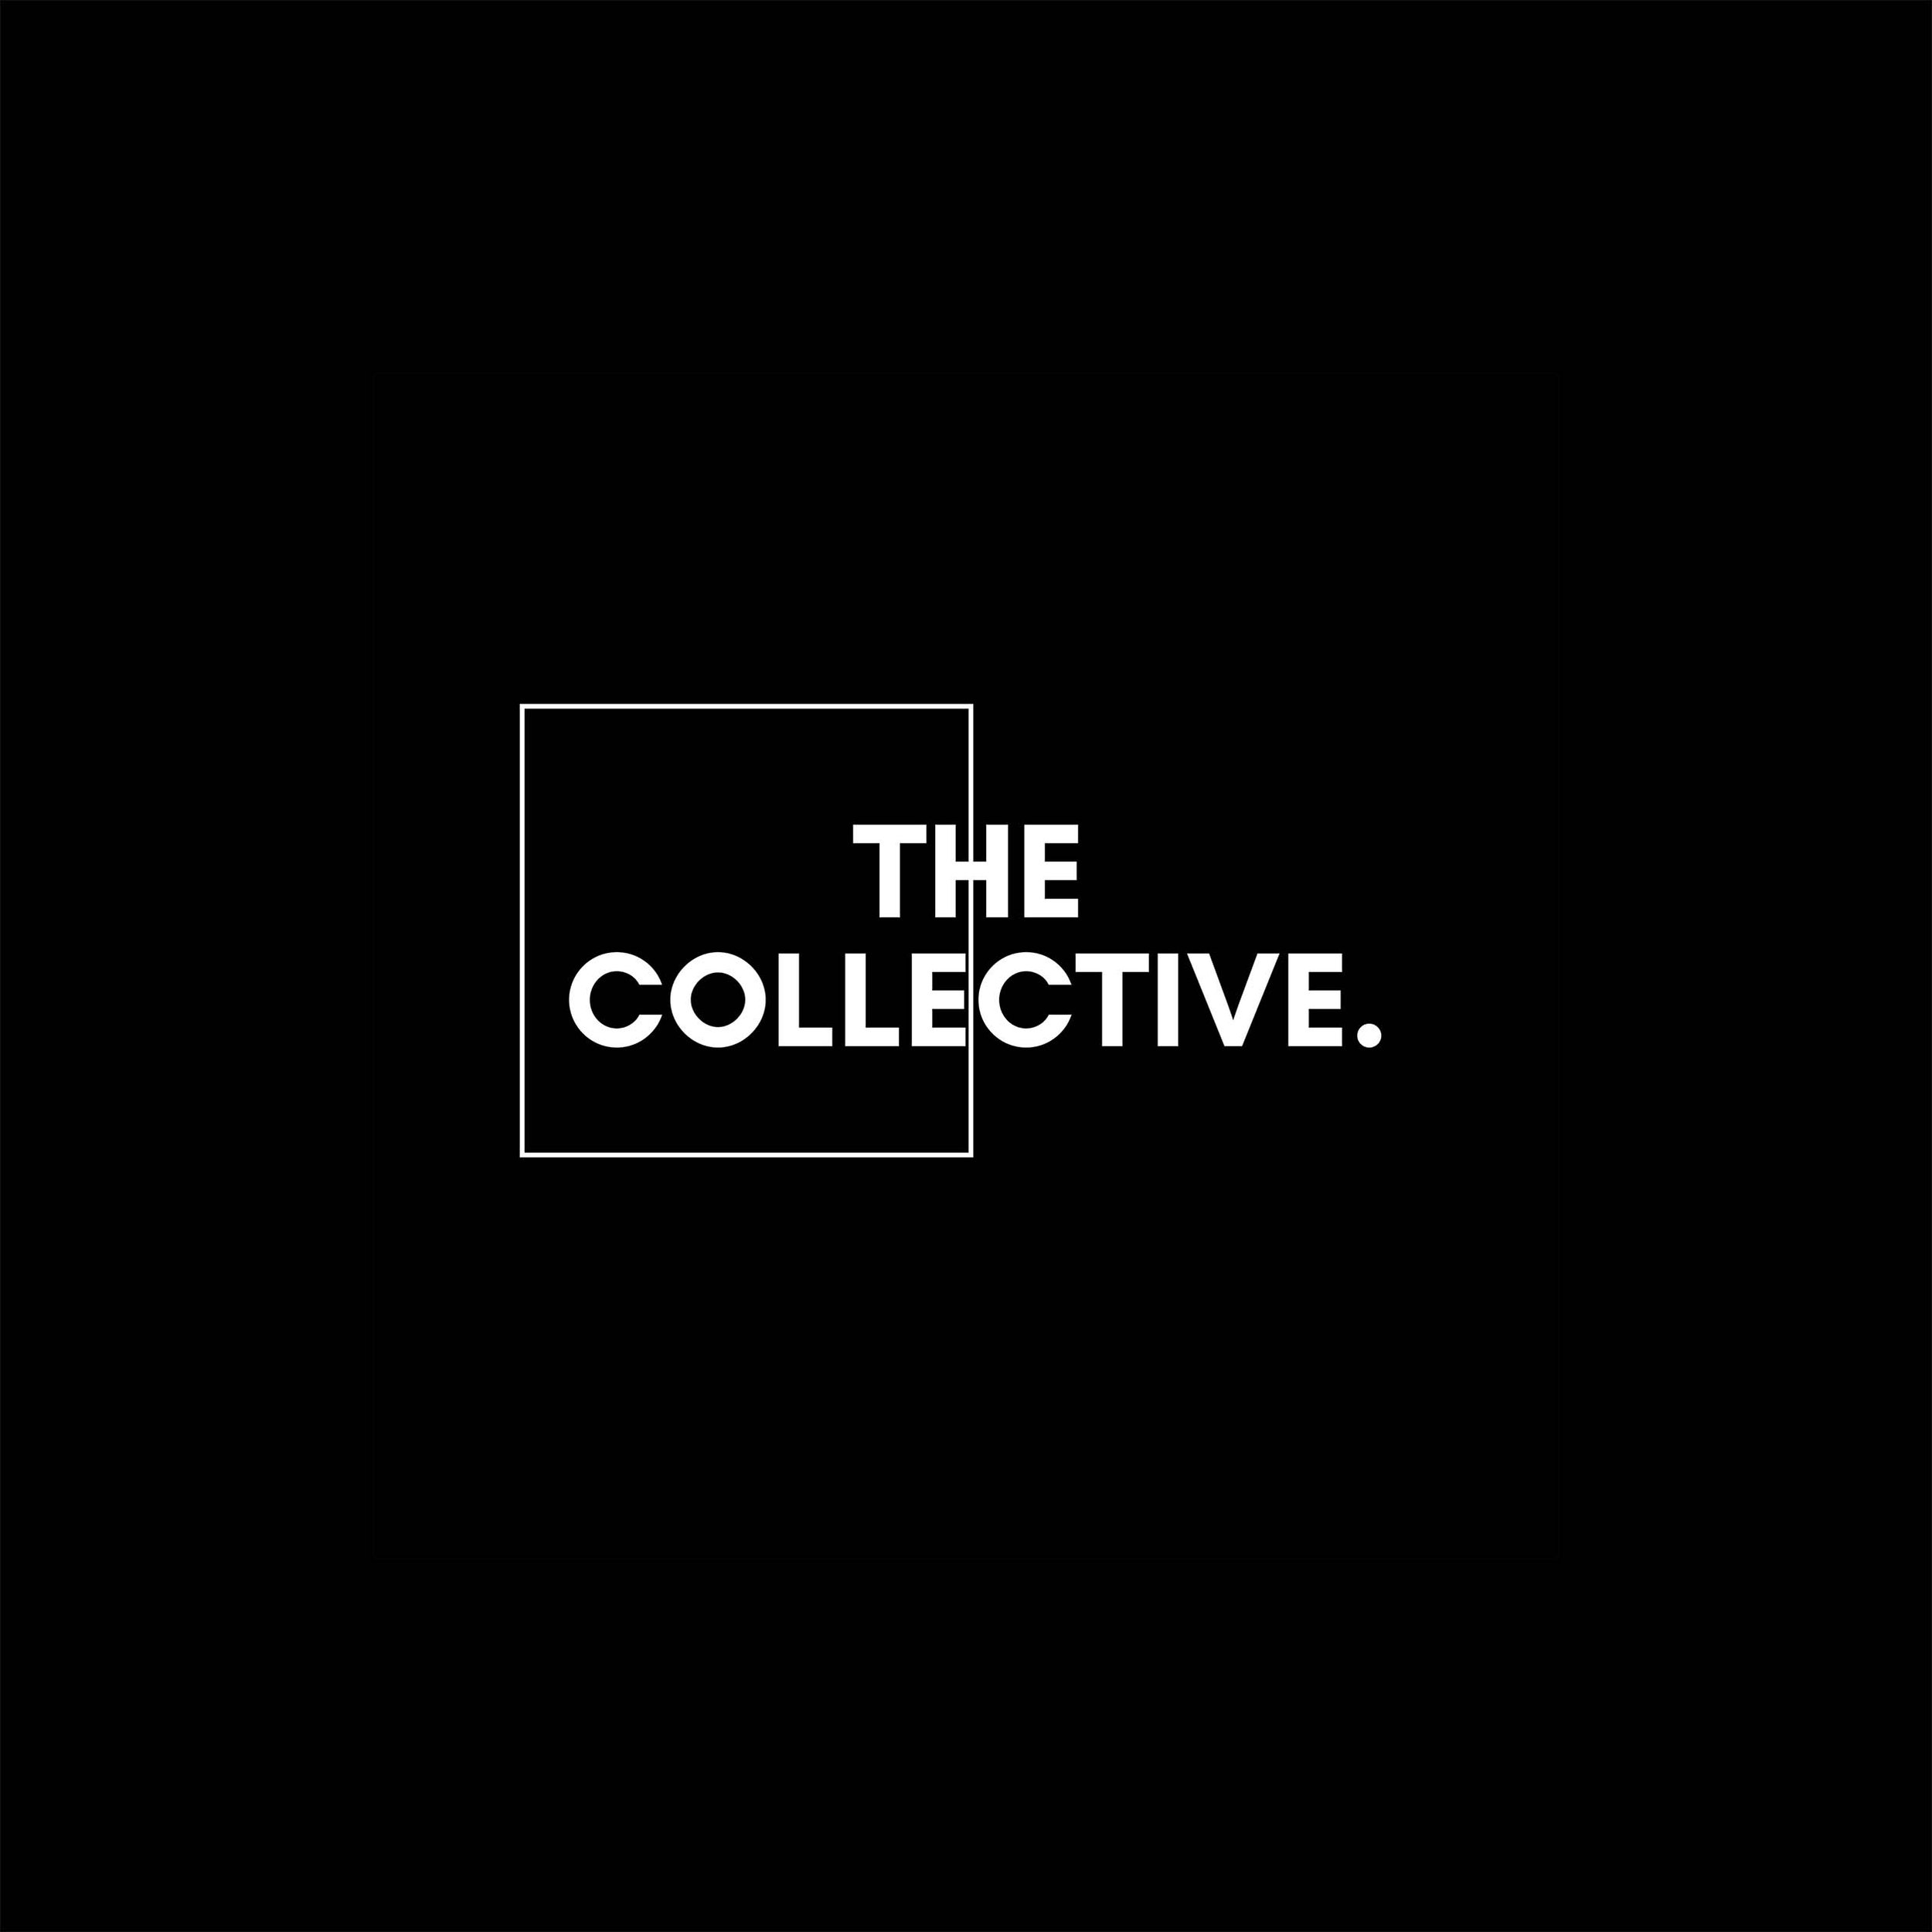 The Collective.